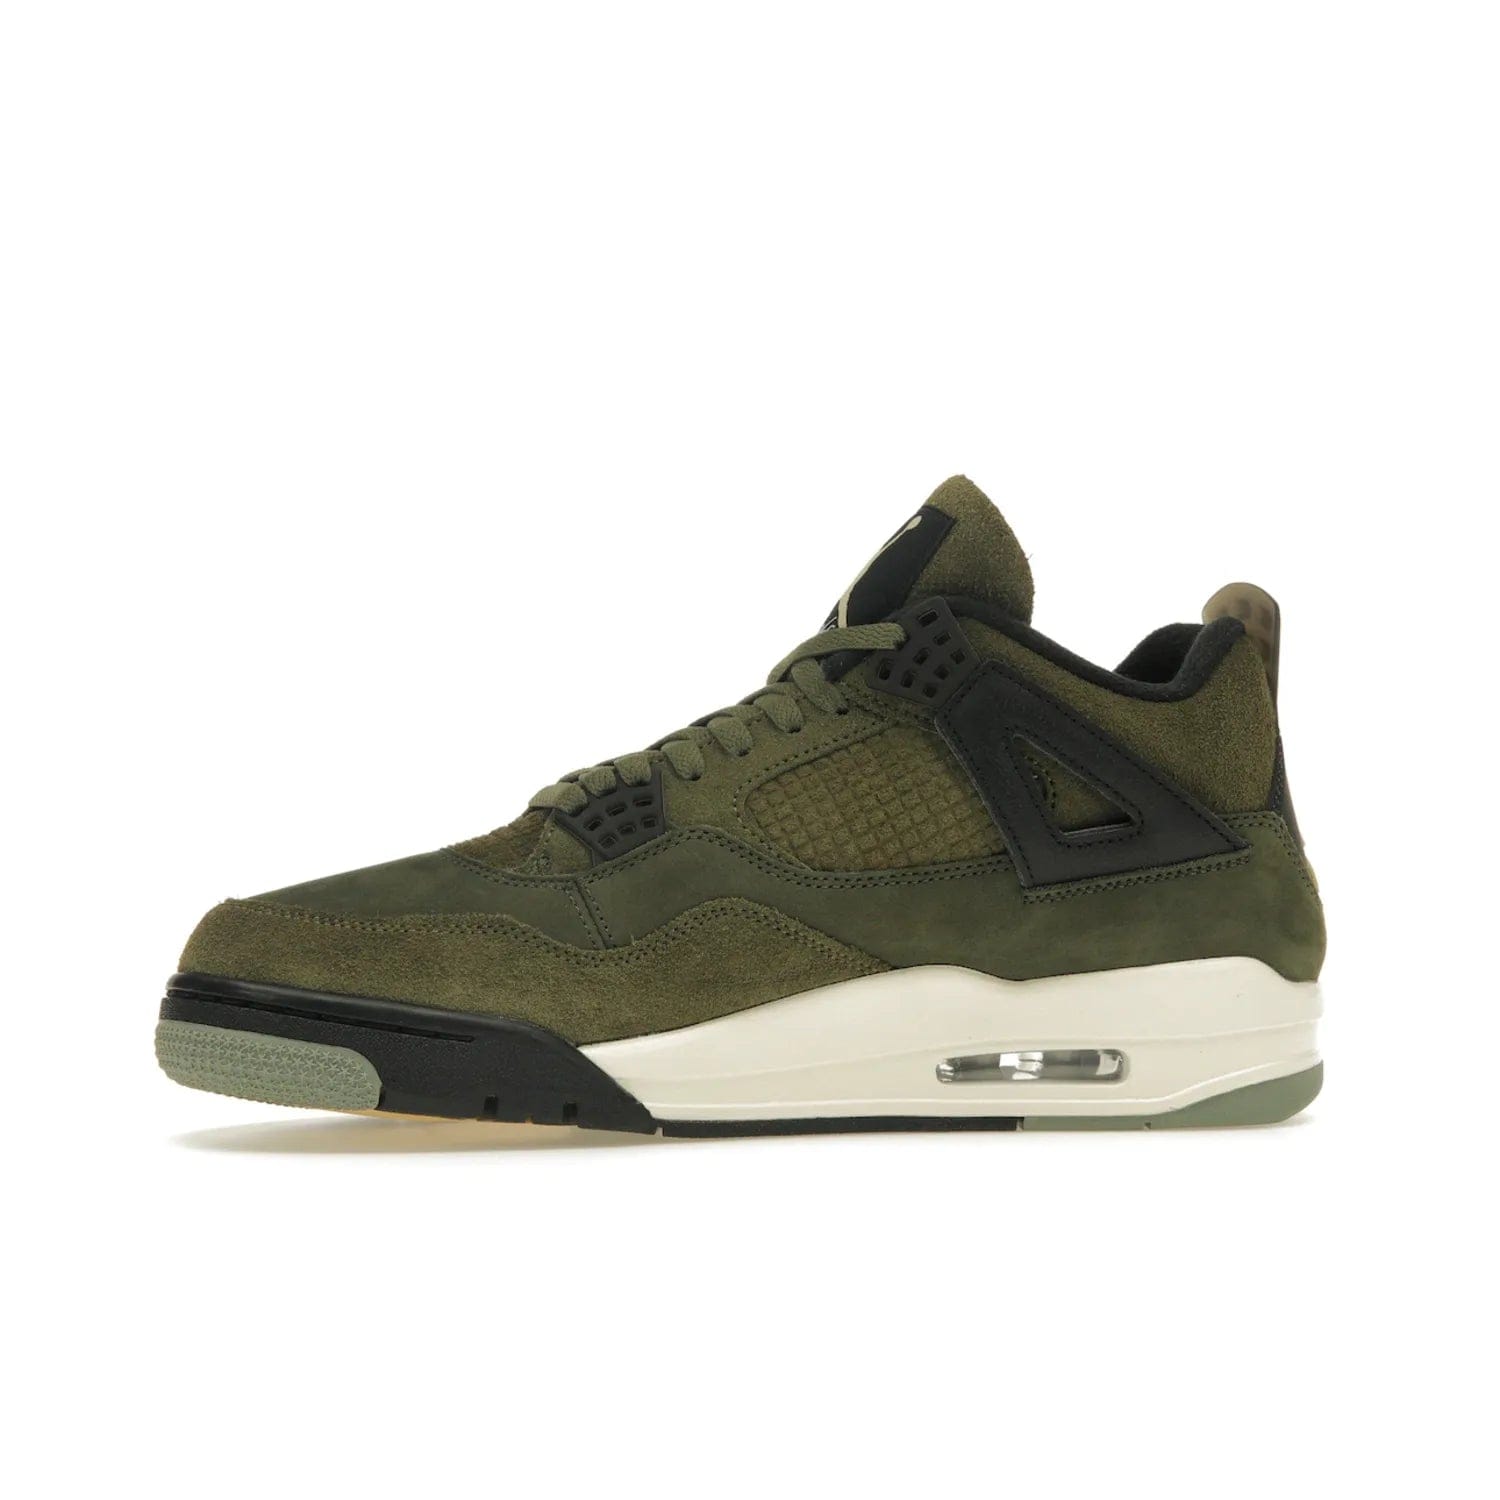 Jordan 4 Retro SE Craft Medium Olive - Image 18 - Only at www.BallersClubKickz.com - Grab the Jordan 4 Retro SE Crafts for a unique style. Combines Medium Olive, Pale Vanilla, Khaki, Black and Sail, with same classic shape, cushioning, and rubber outsole. Available on November 18th!